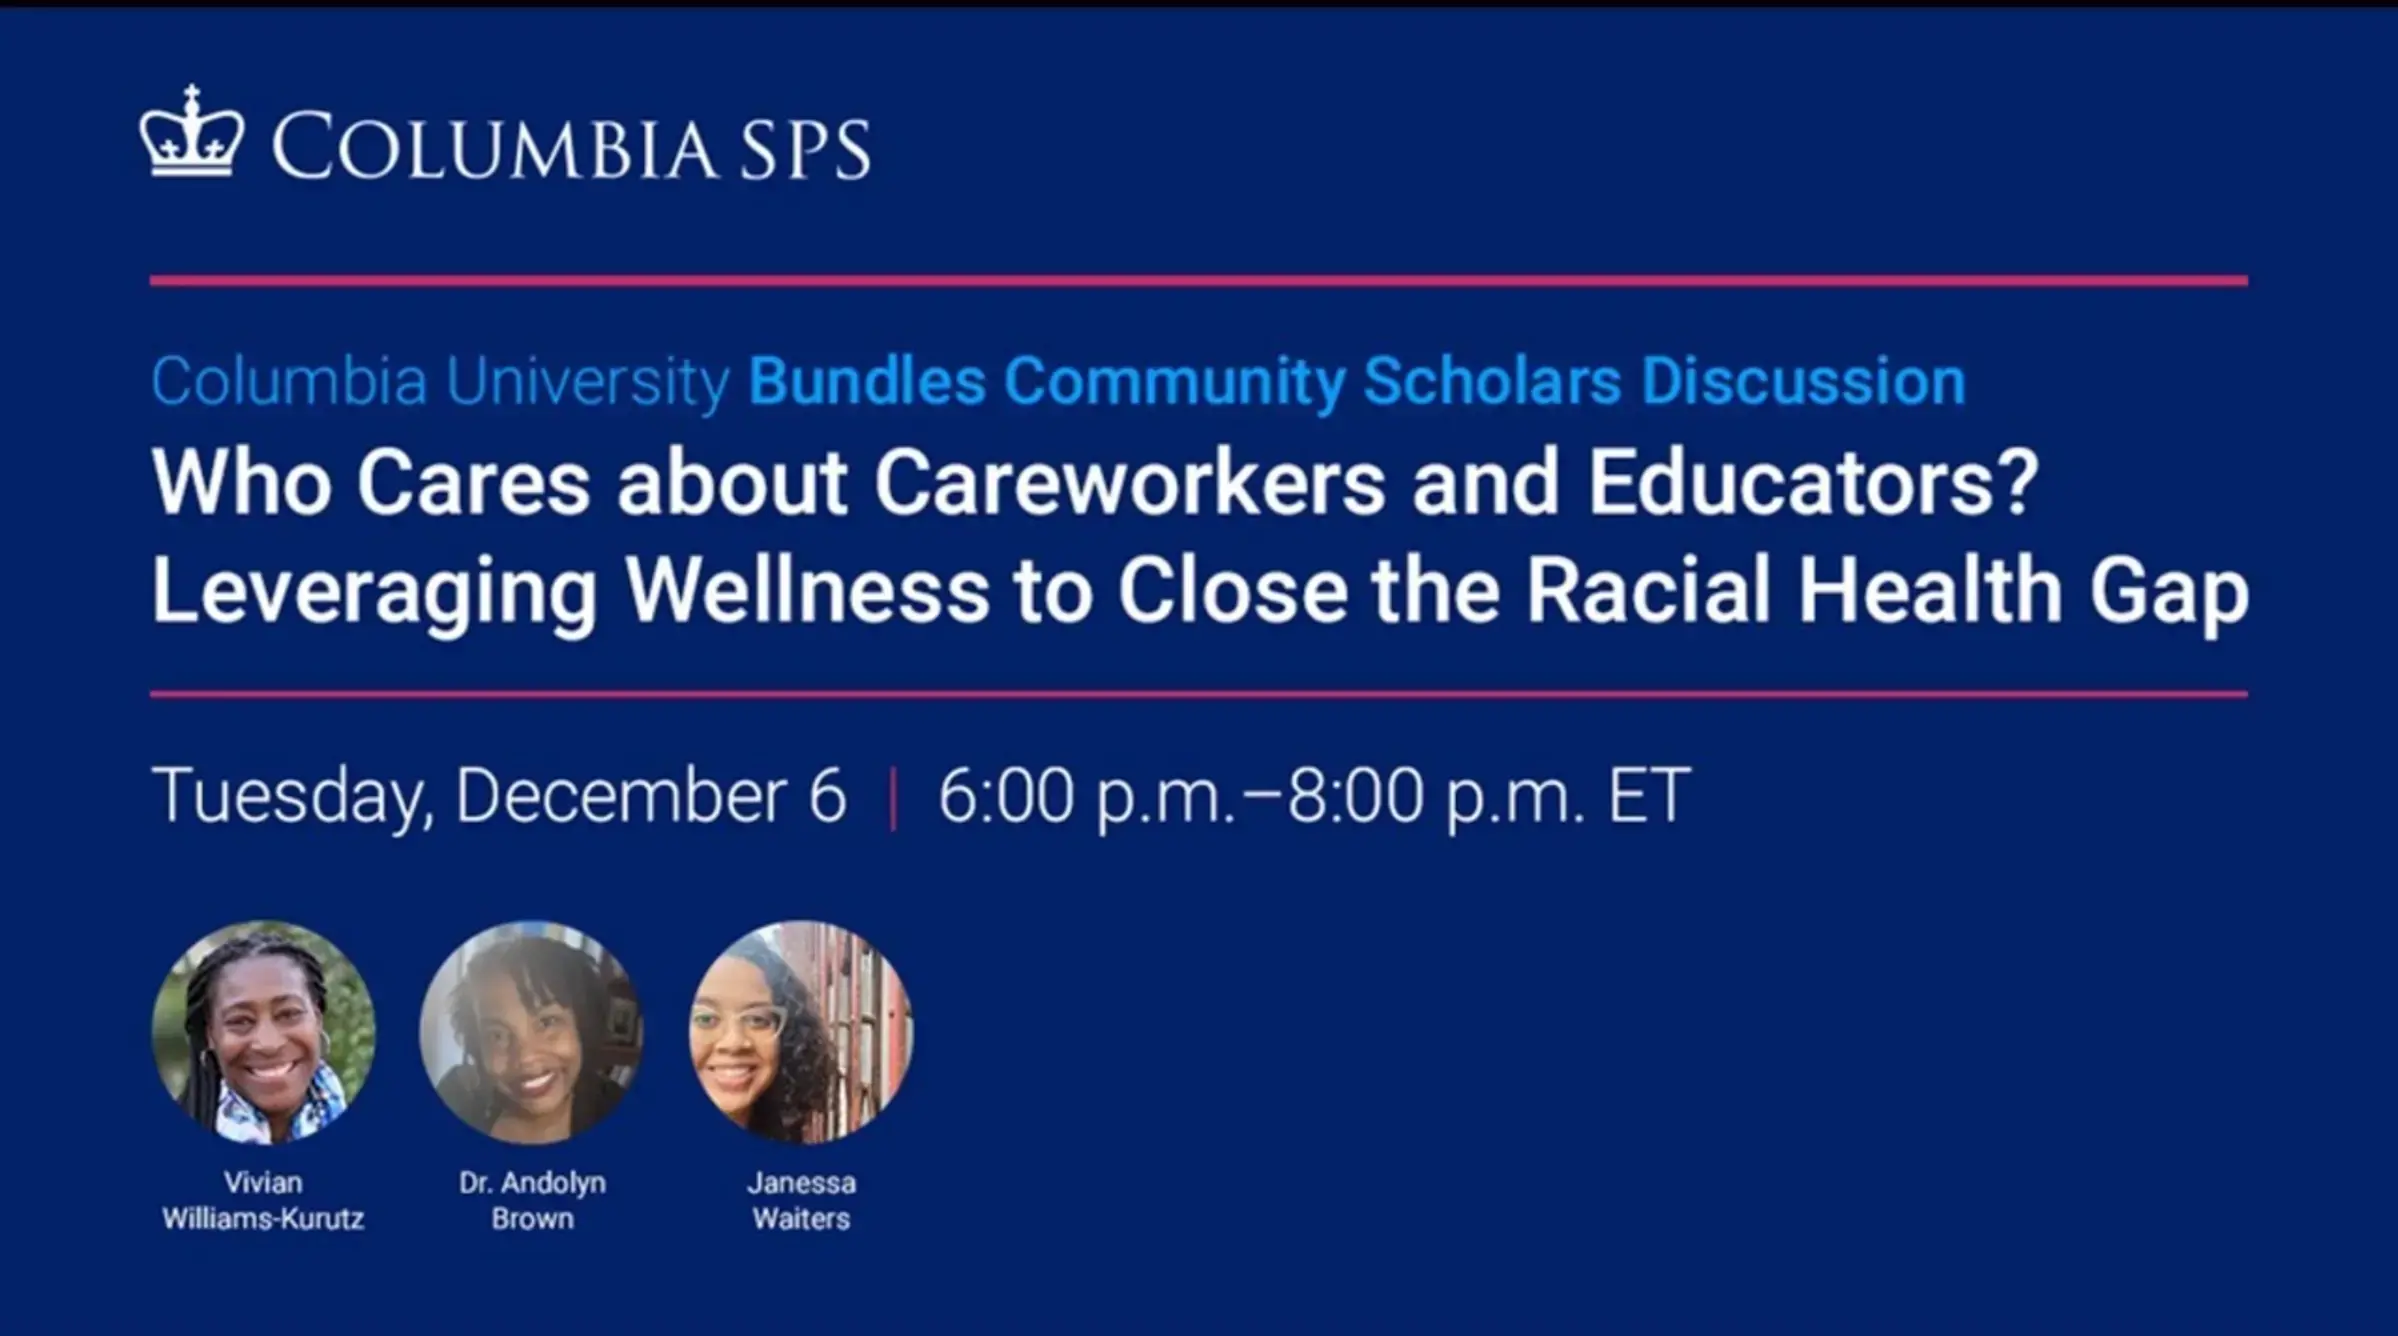 Who Cares About Careworkers and Educators? - Community Scholars Discussion